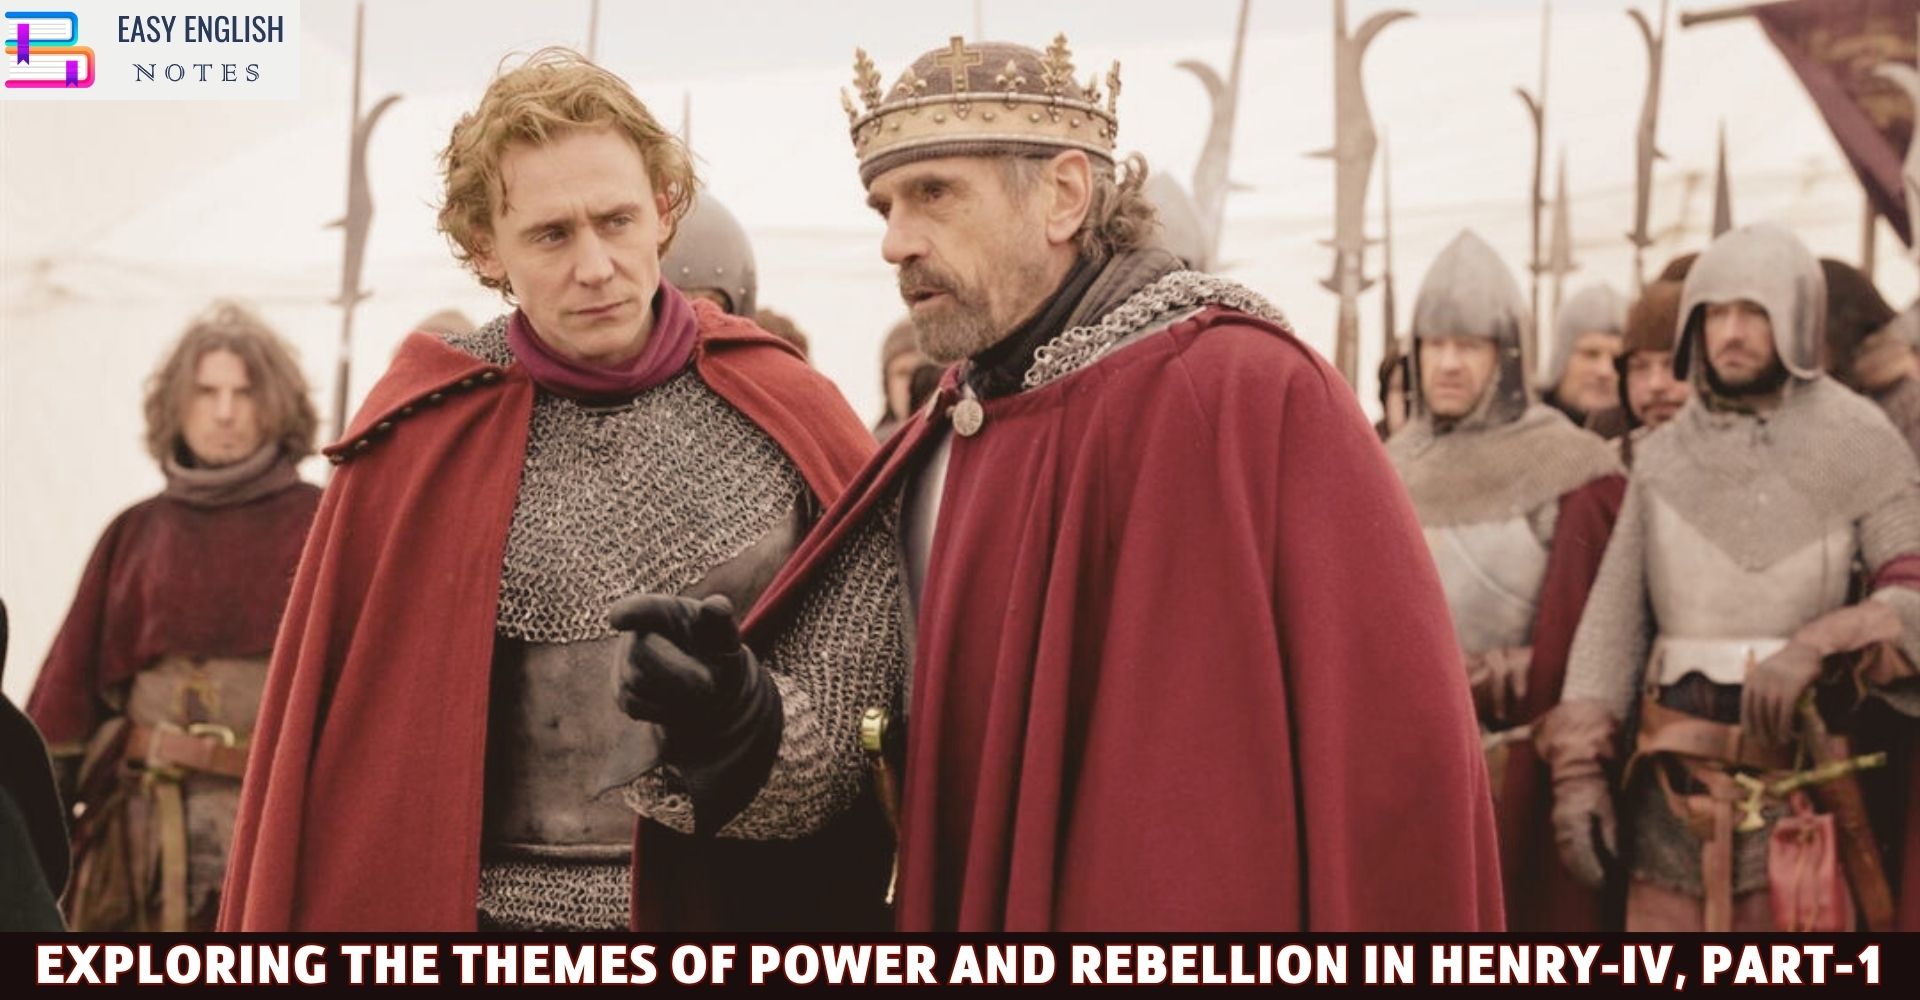 Exploring the Themes of Power and Rebellion in Henry-IV, Part-1